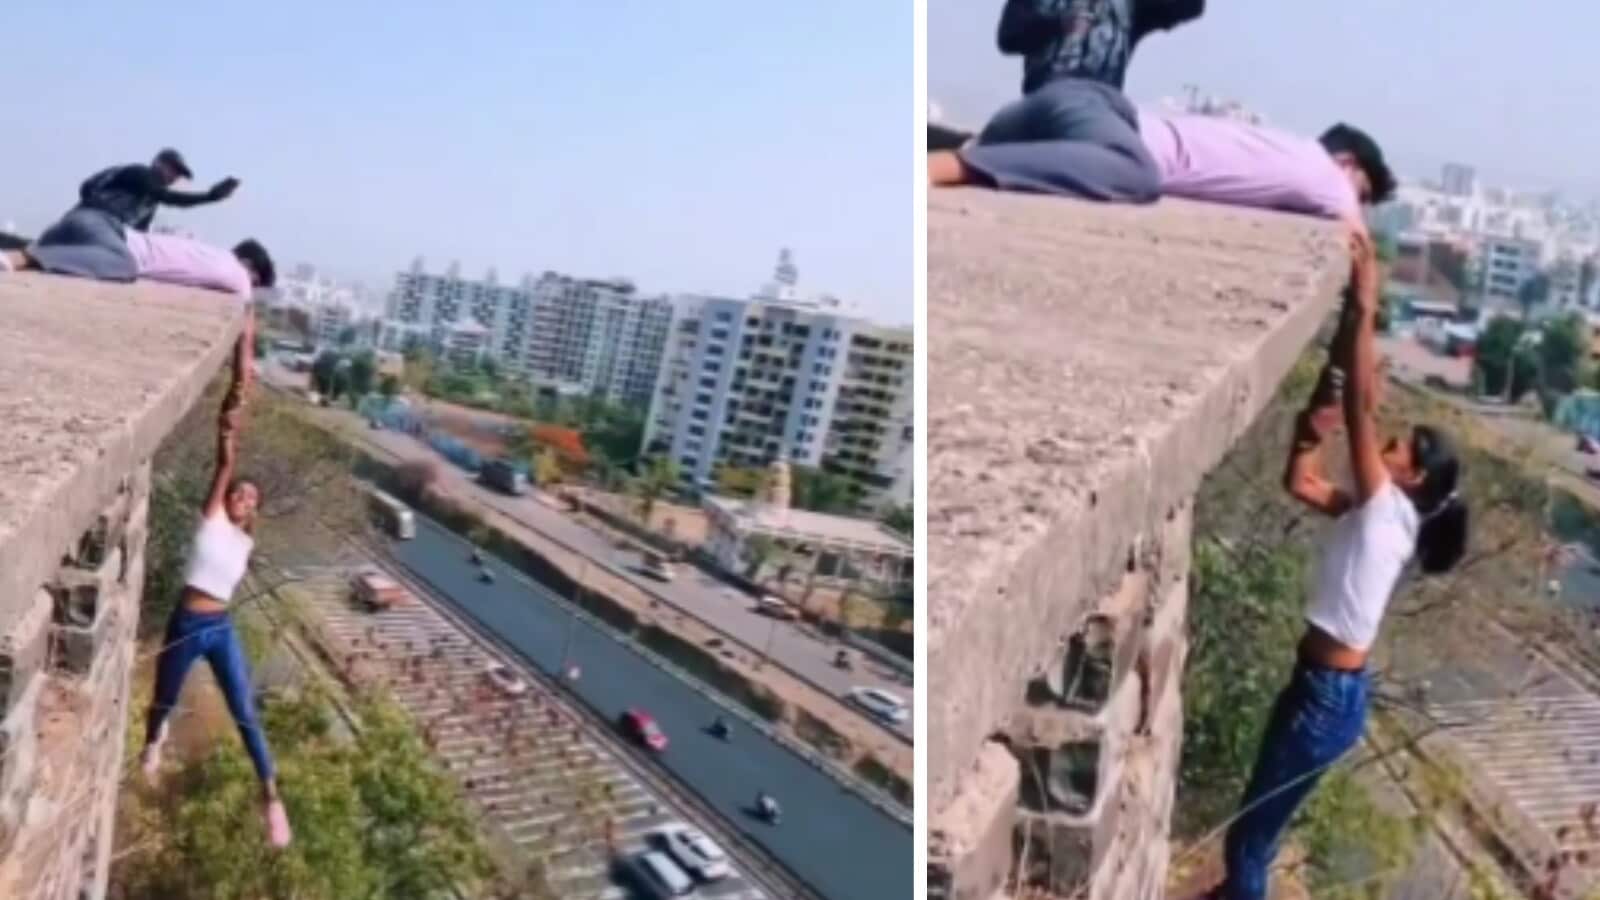 Pune girl hangs from top of building in dangerous stunt. Viral video sparks outrage: ‘Heights of stupidity’